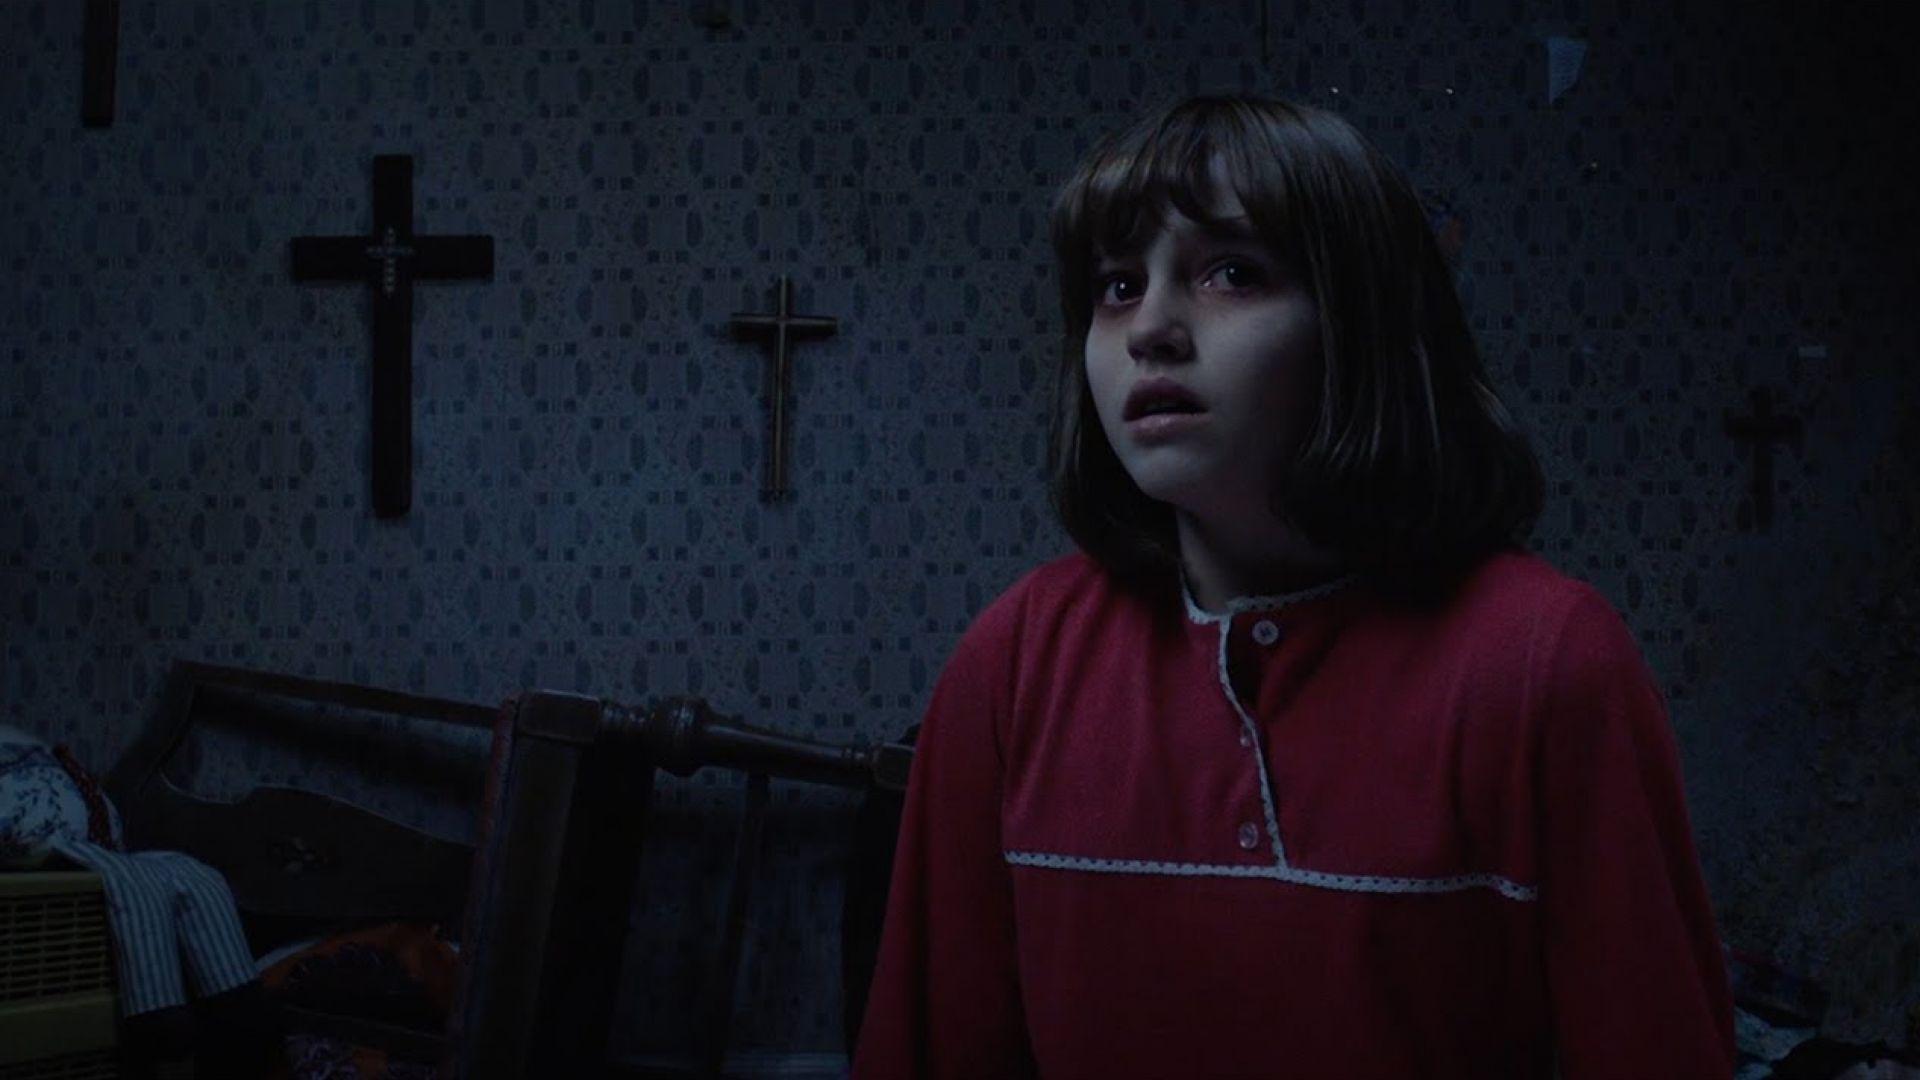 Official Trailer released for The Conjuring 2